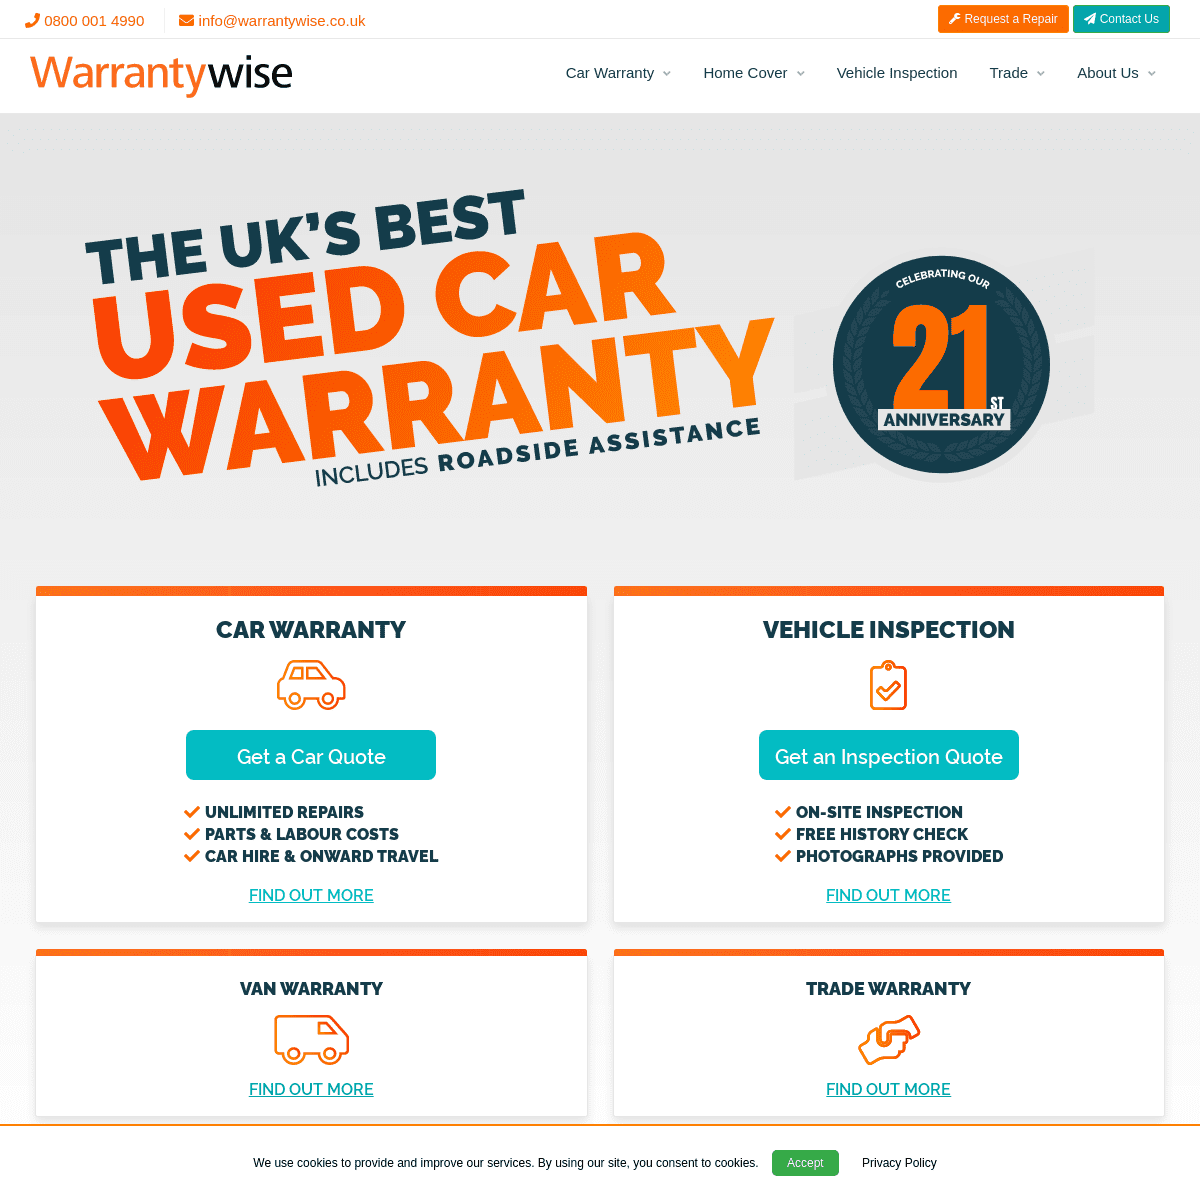 A complete backup of https://warrantywise.co.uk